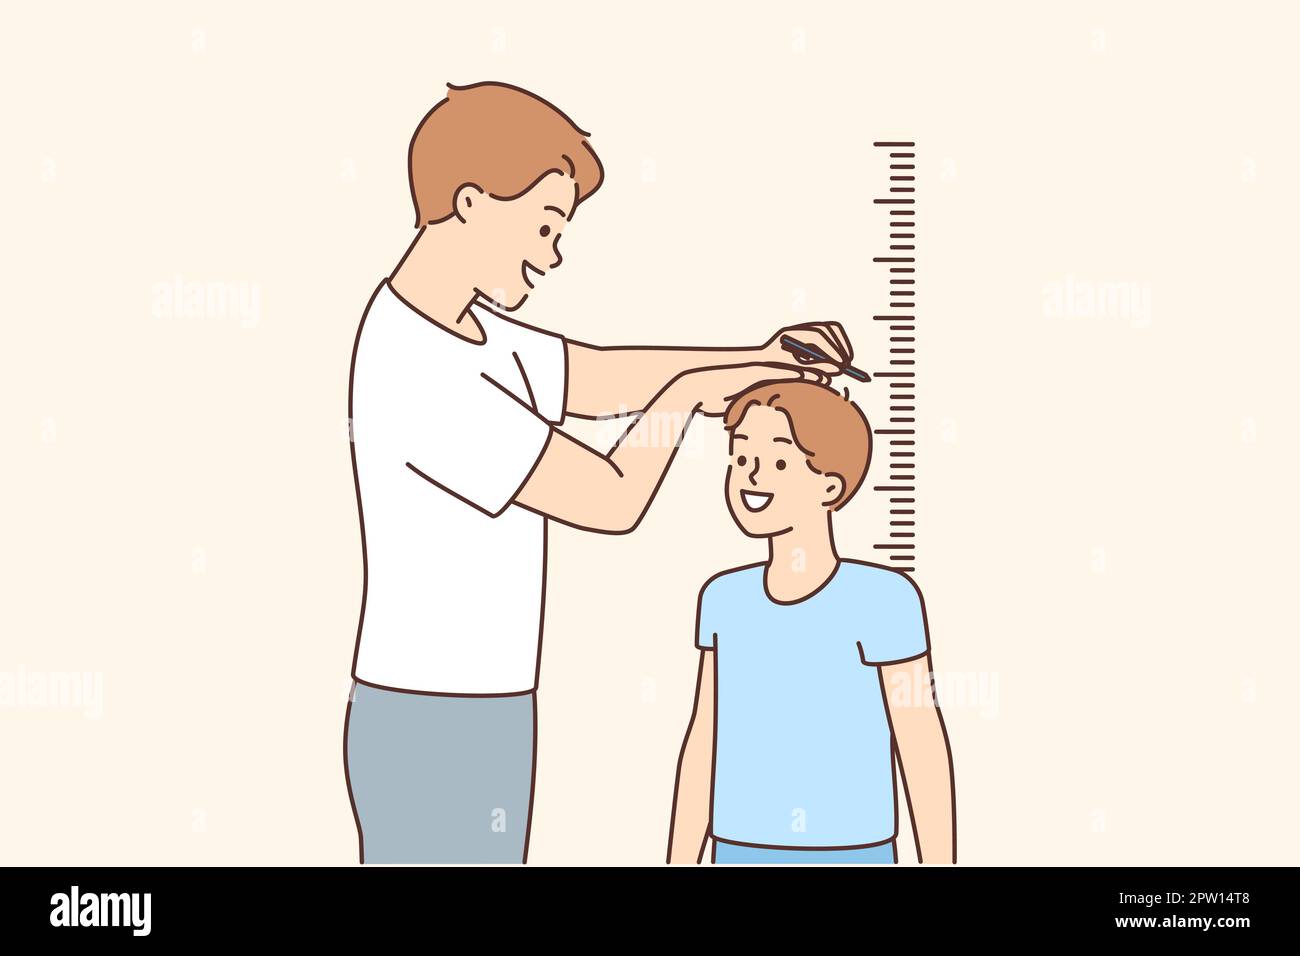 https://c8.alamy.com/comp/2PW14T8/smiling-father-measure-son-height-near-wall-2PW14T8.jpg